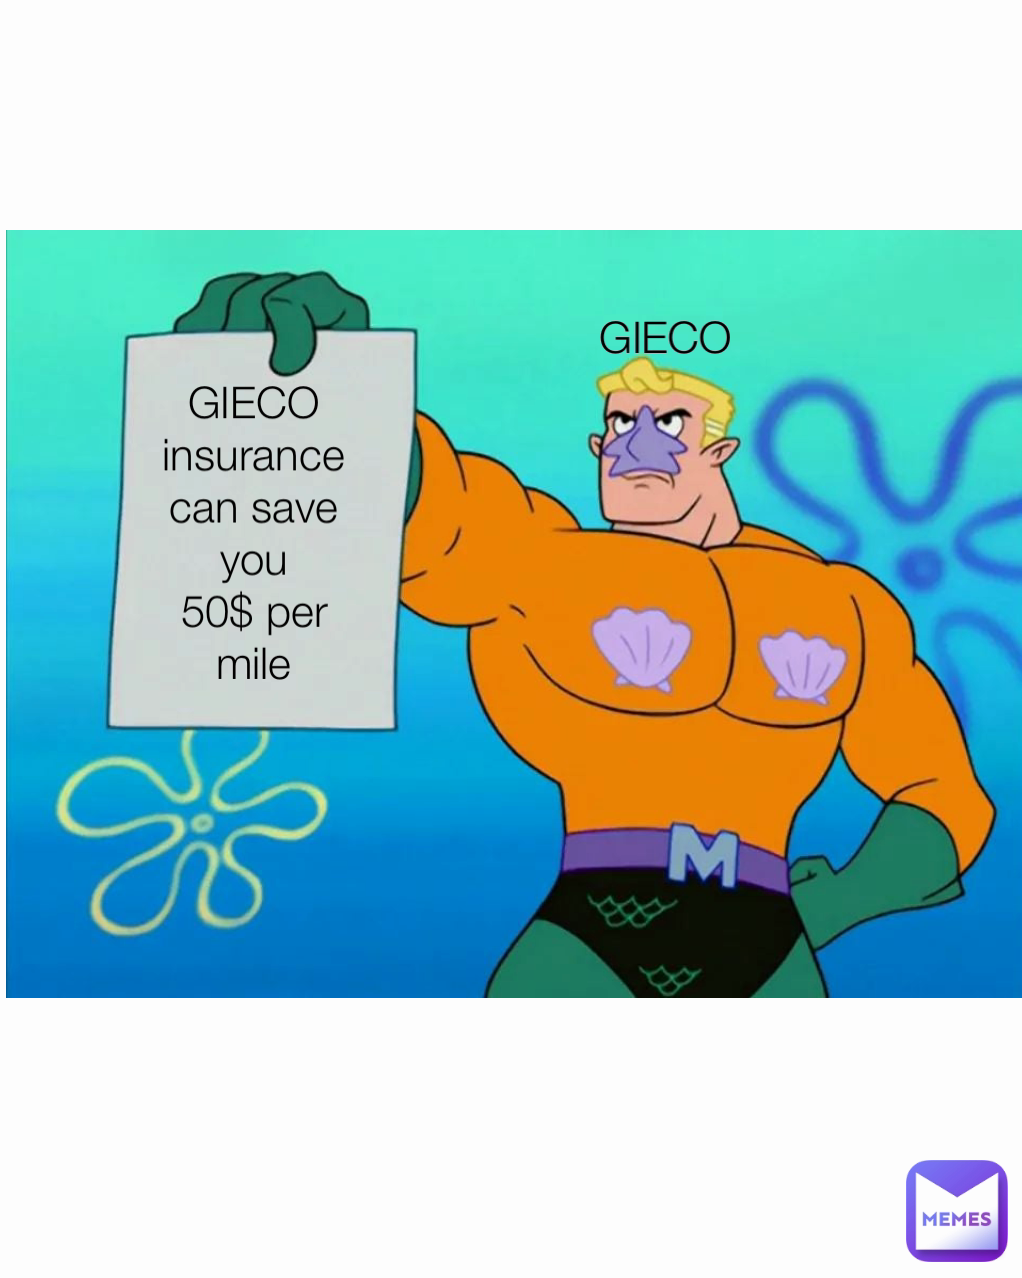 GIECO insurance
can save you
50$ per mile GIECO